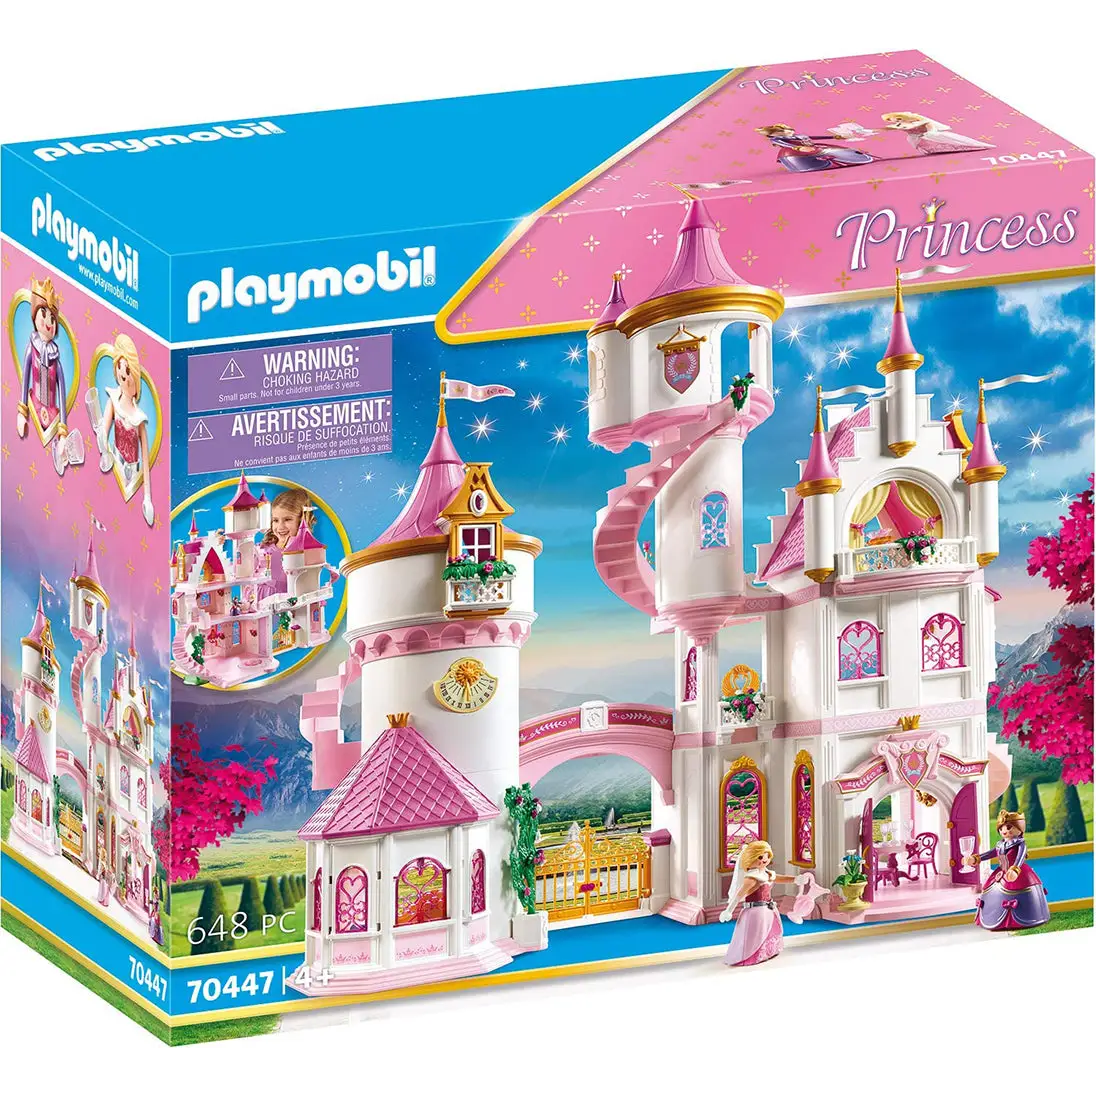 Playmobil Large Princess Castle 70447 (for Kids 4 Years Old